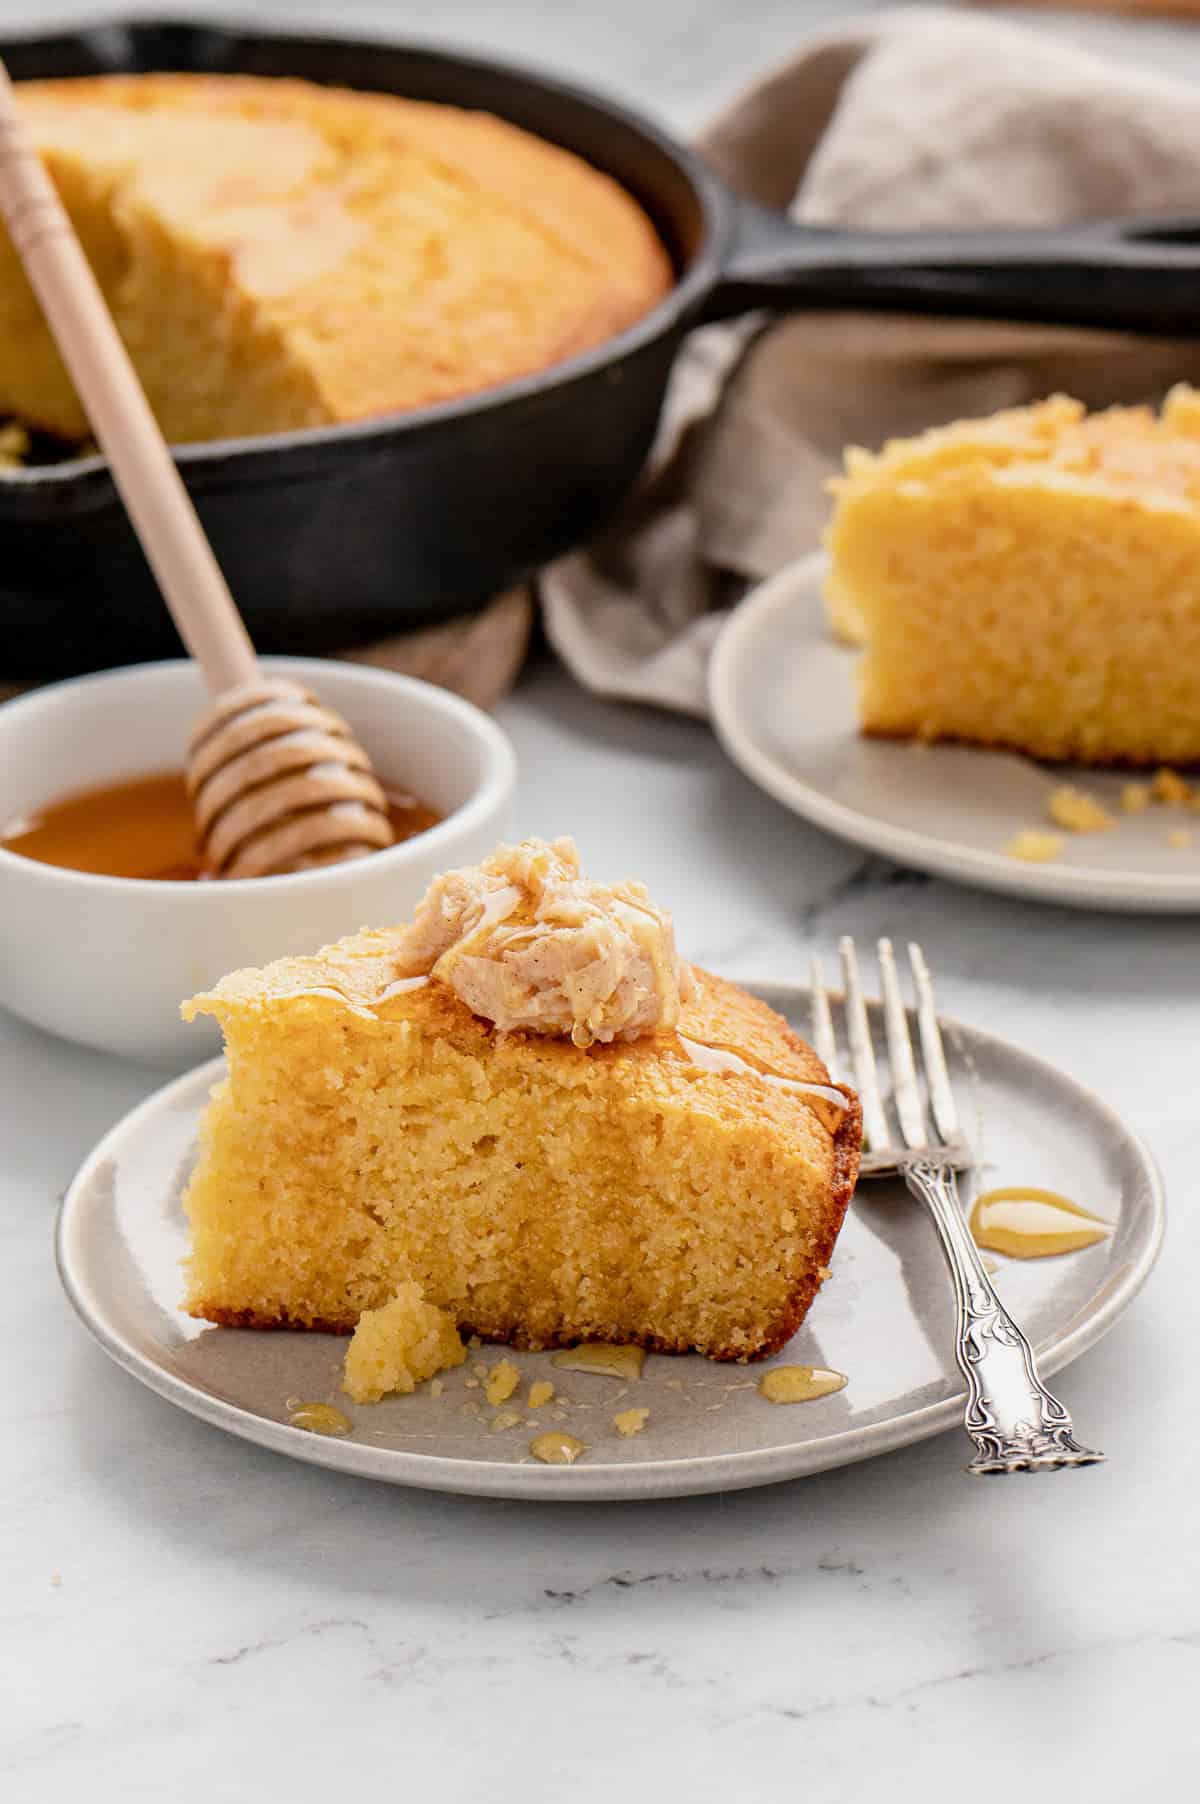 Profile view of a slice of cornbread on a plate with a fork.